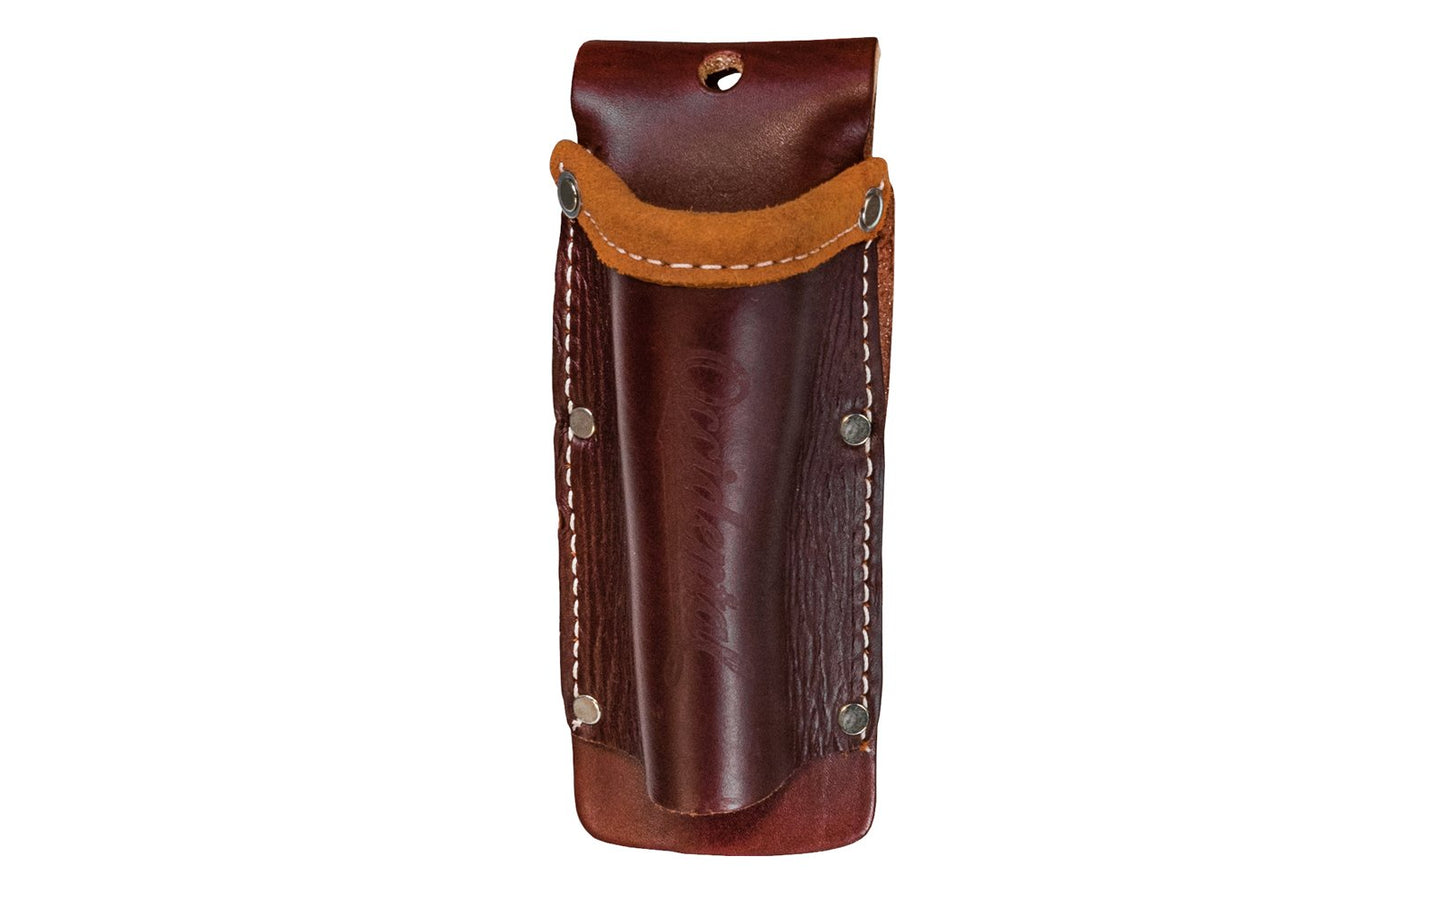 Occidental Leather No Slap Hammer Holder Holster ~ 5518 - Made in USA ~ Made of Sturdy Thick Leather - 3" Projection  -  Holster - Fits up to a 3" work belt - Extra Thick Leather - Riveted - Also accommodates hammer tackers & flat bars up to 1-5/8" diameter - No-Slap Holster